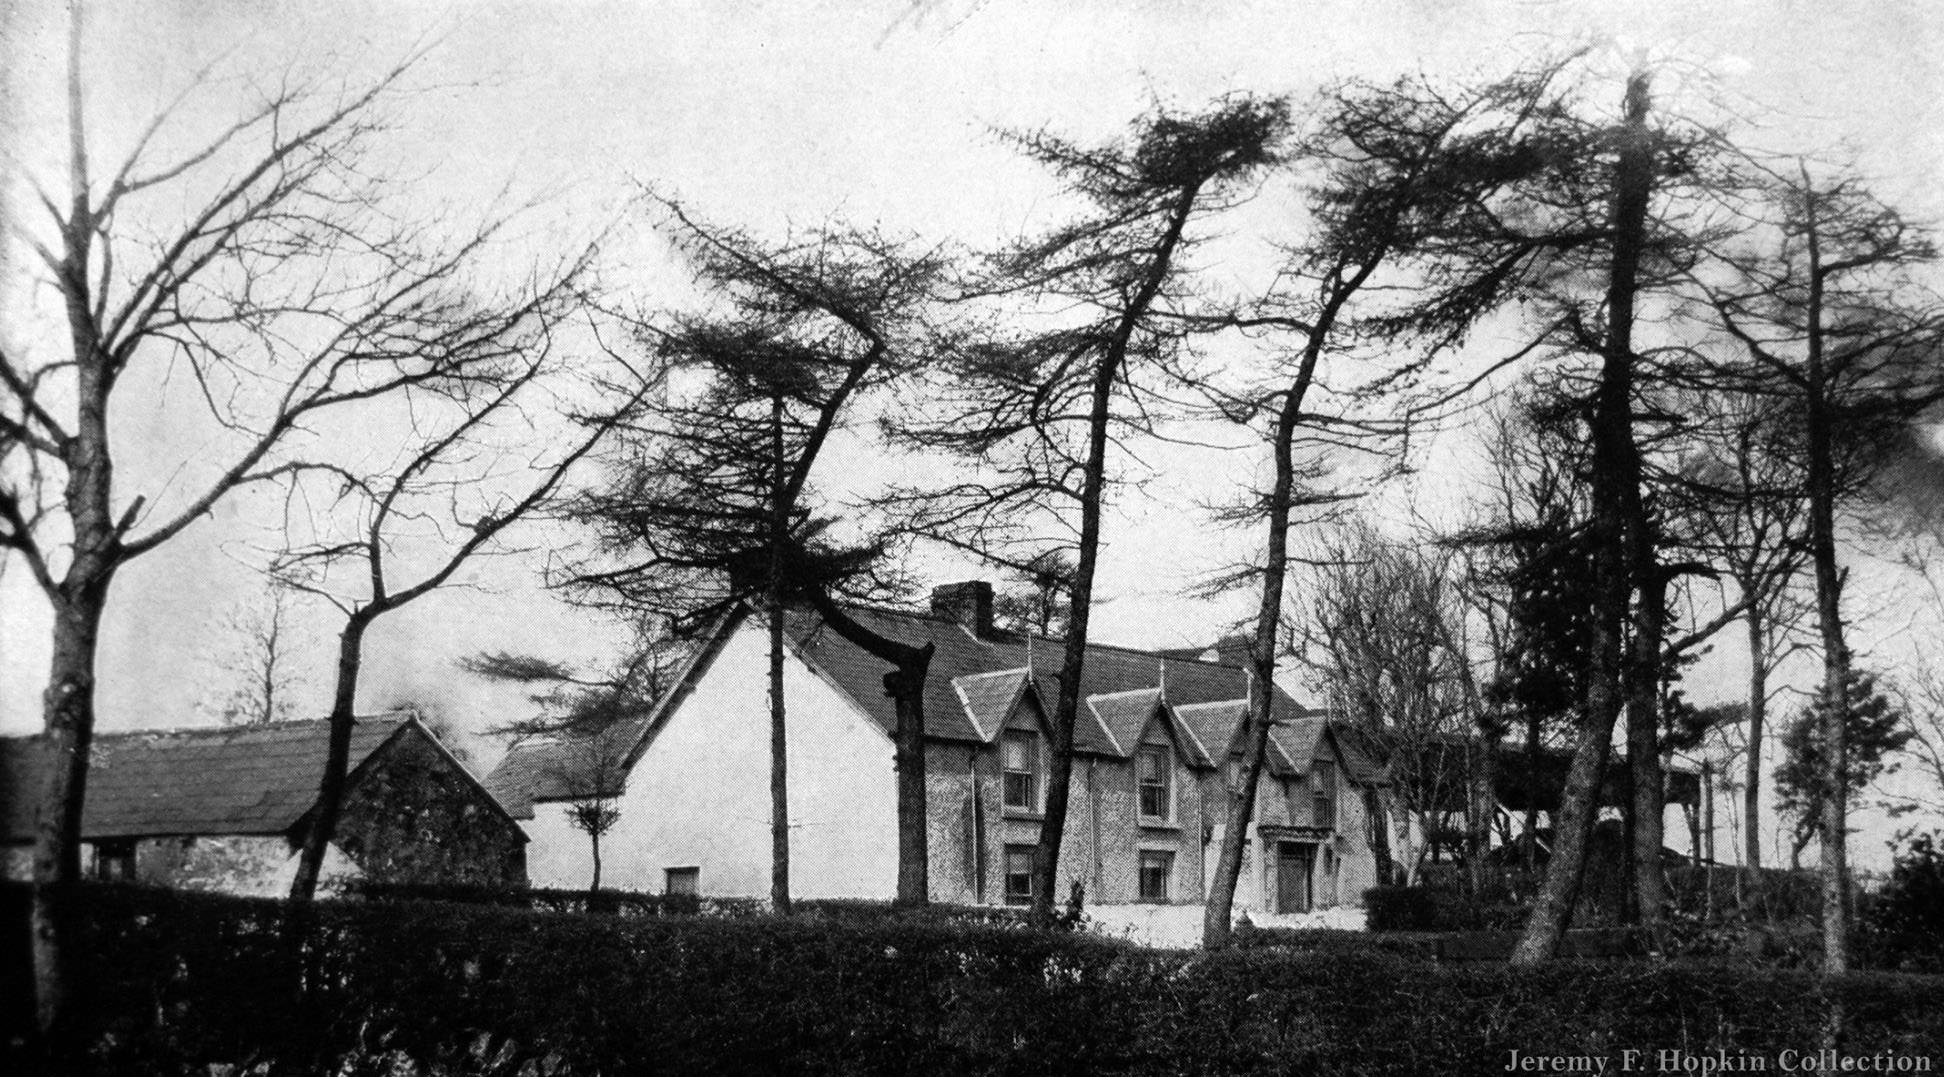 The old home of the Eatons, near Ballymena, 1900s